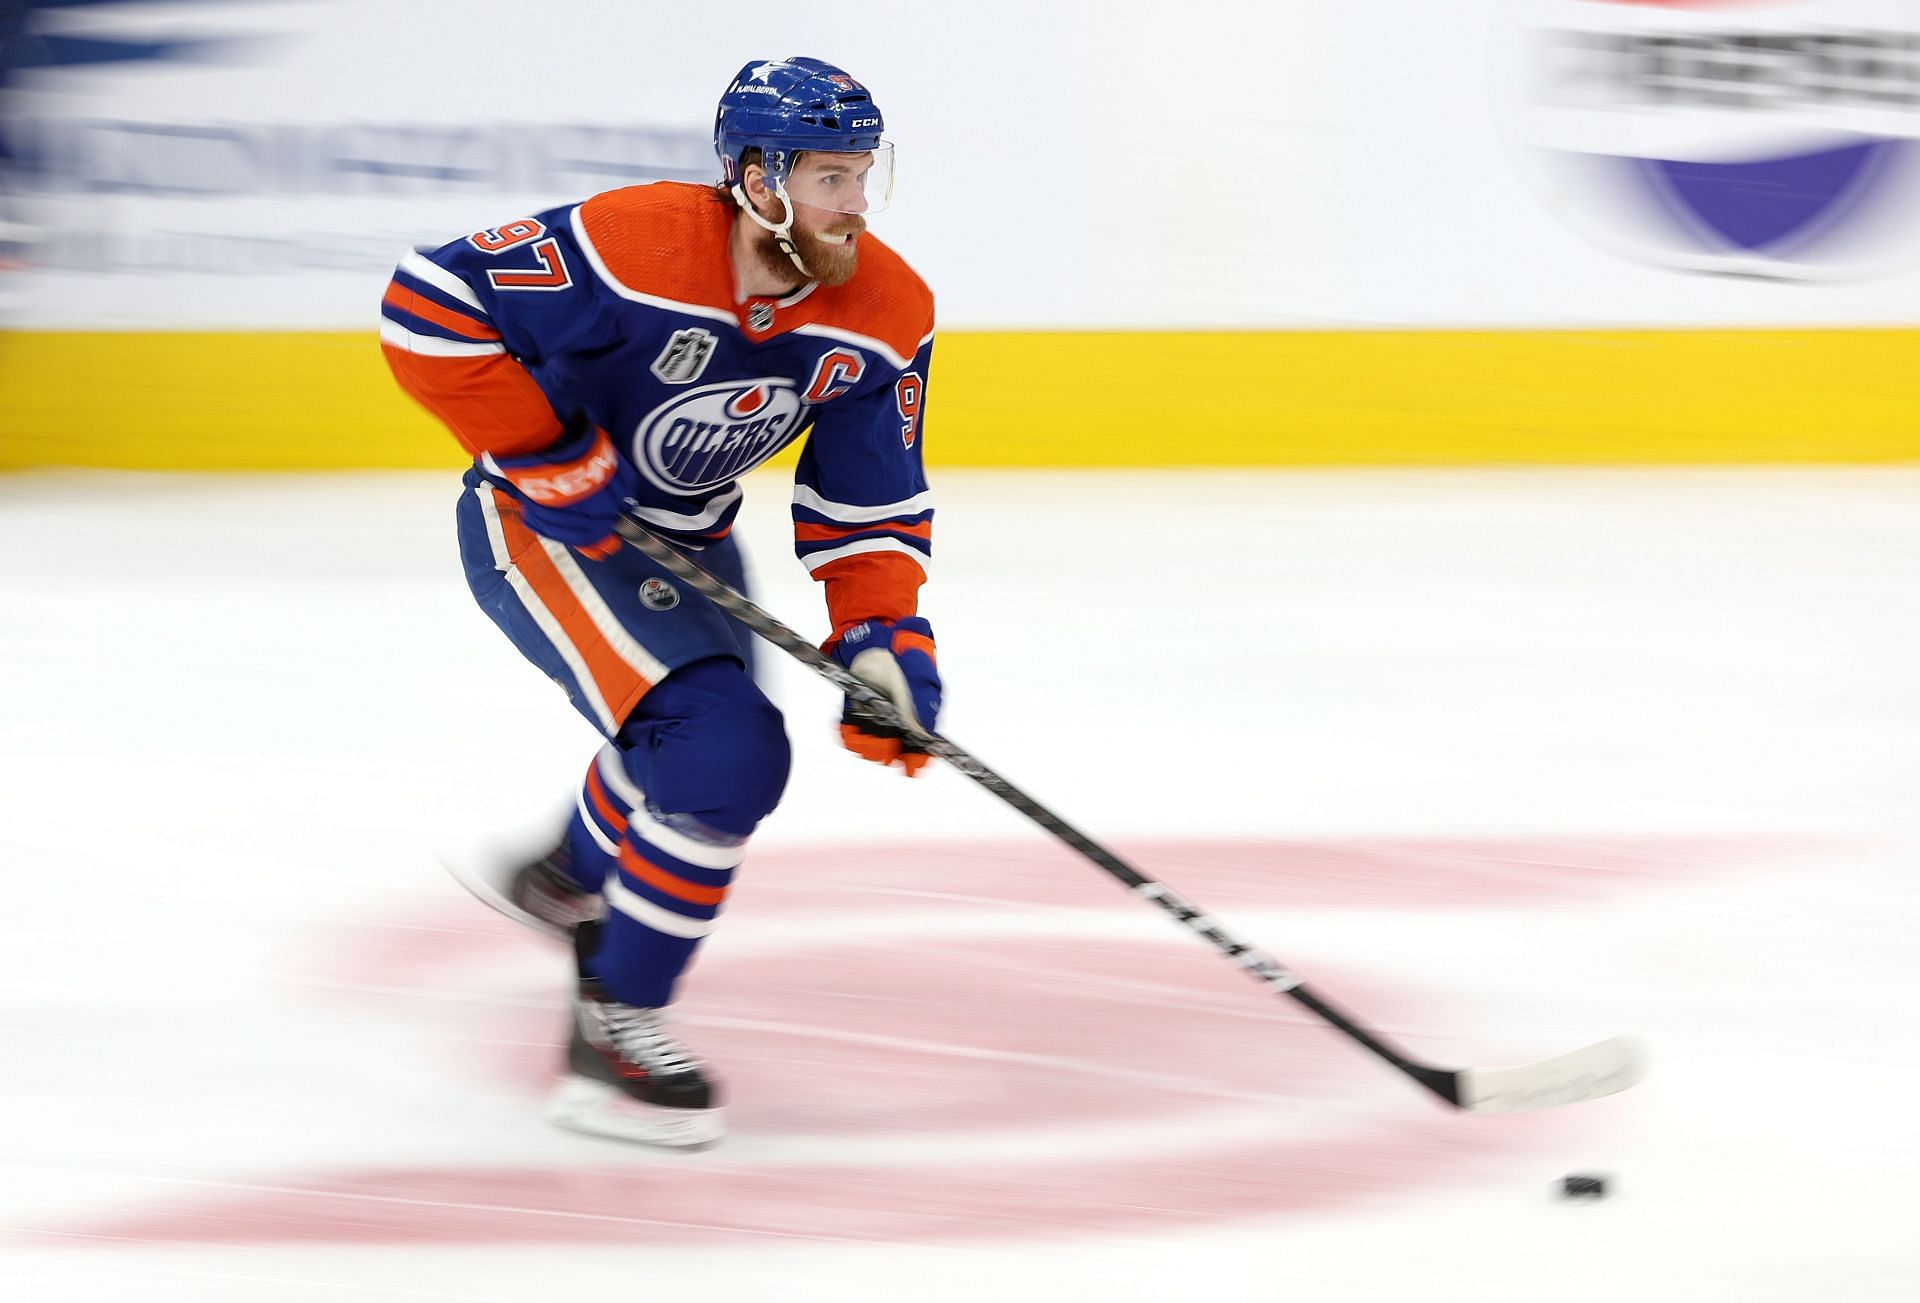 Connor McDavid will try to lead Edmonton to the promised land